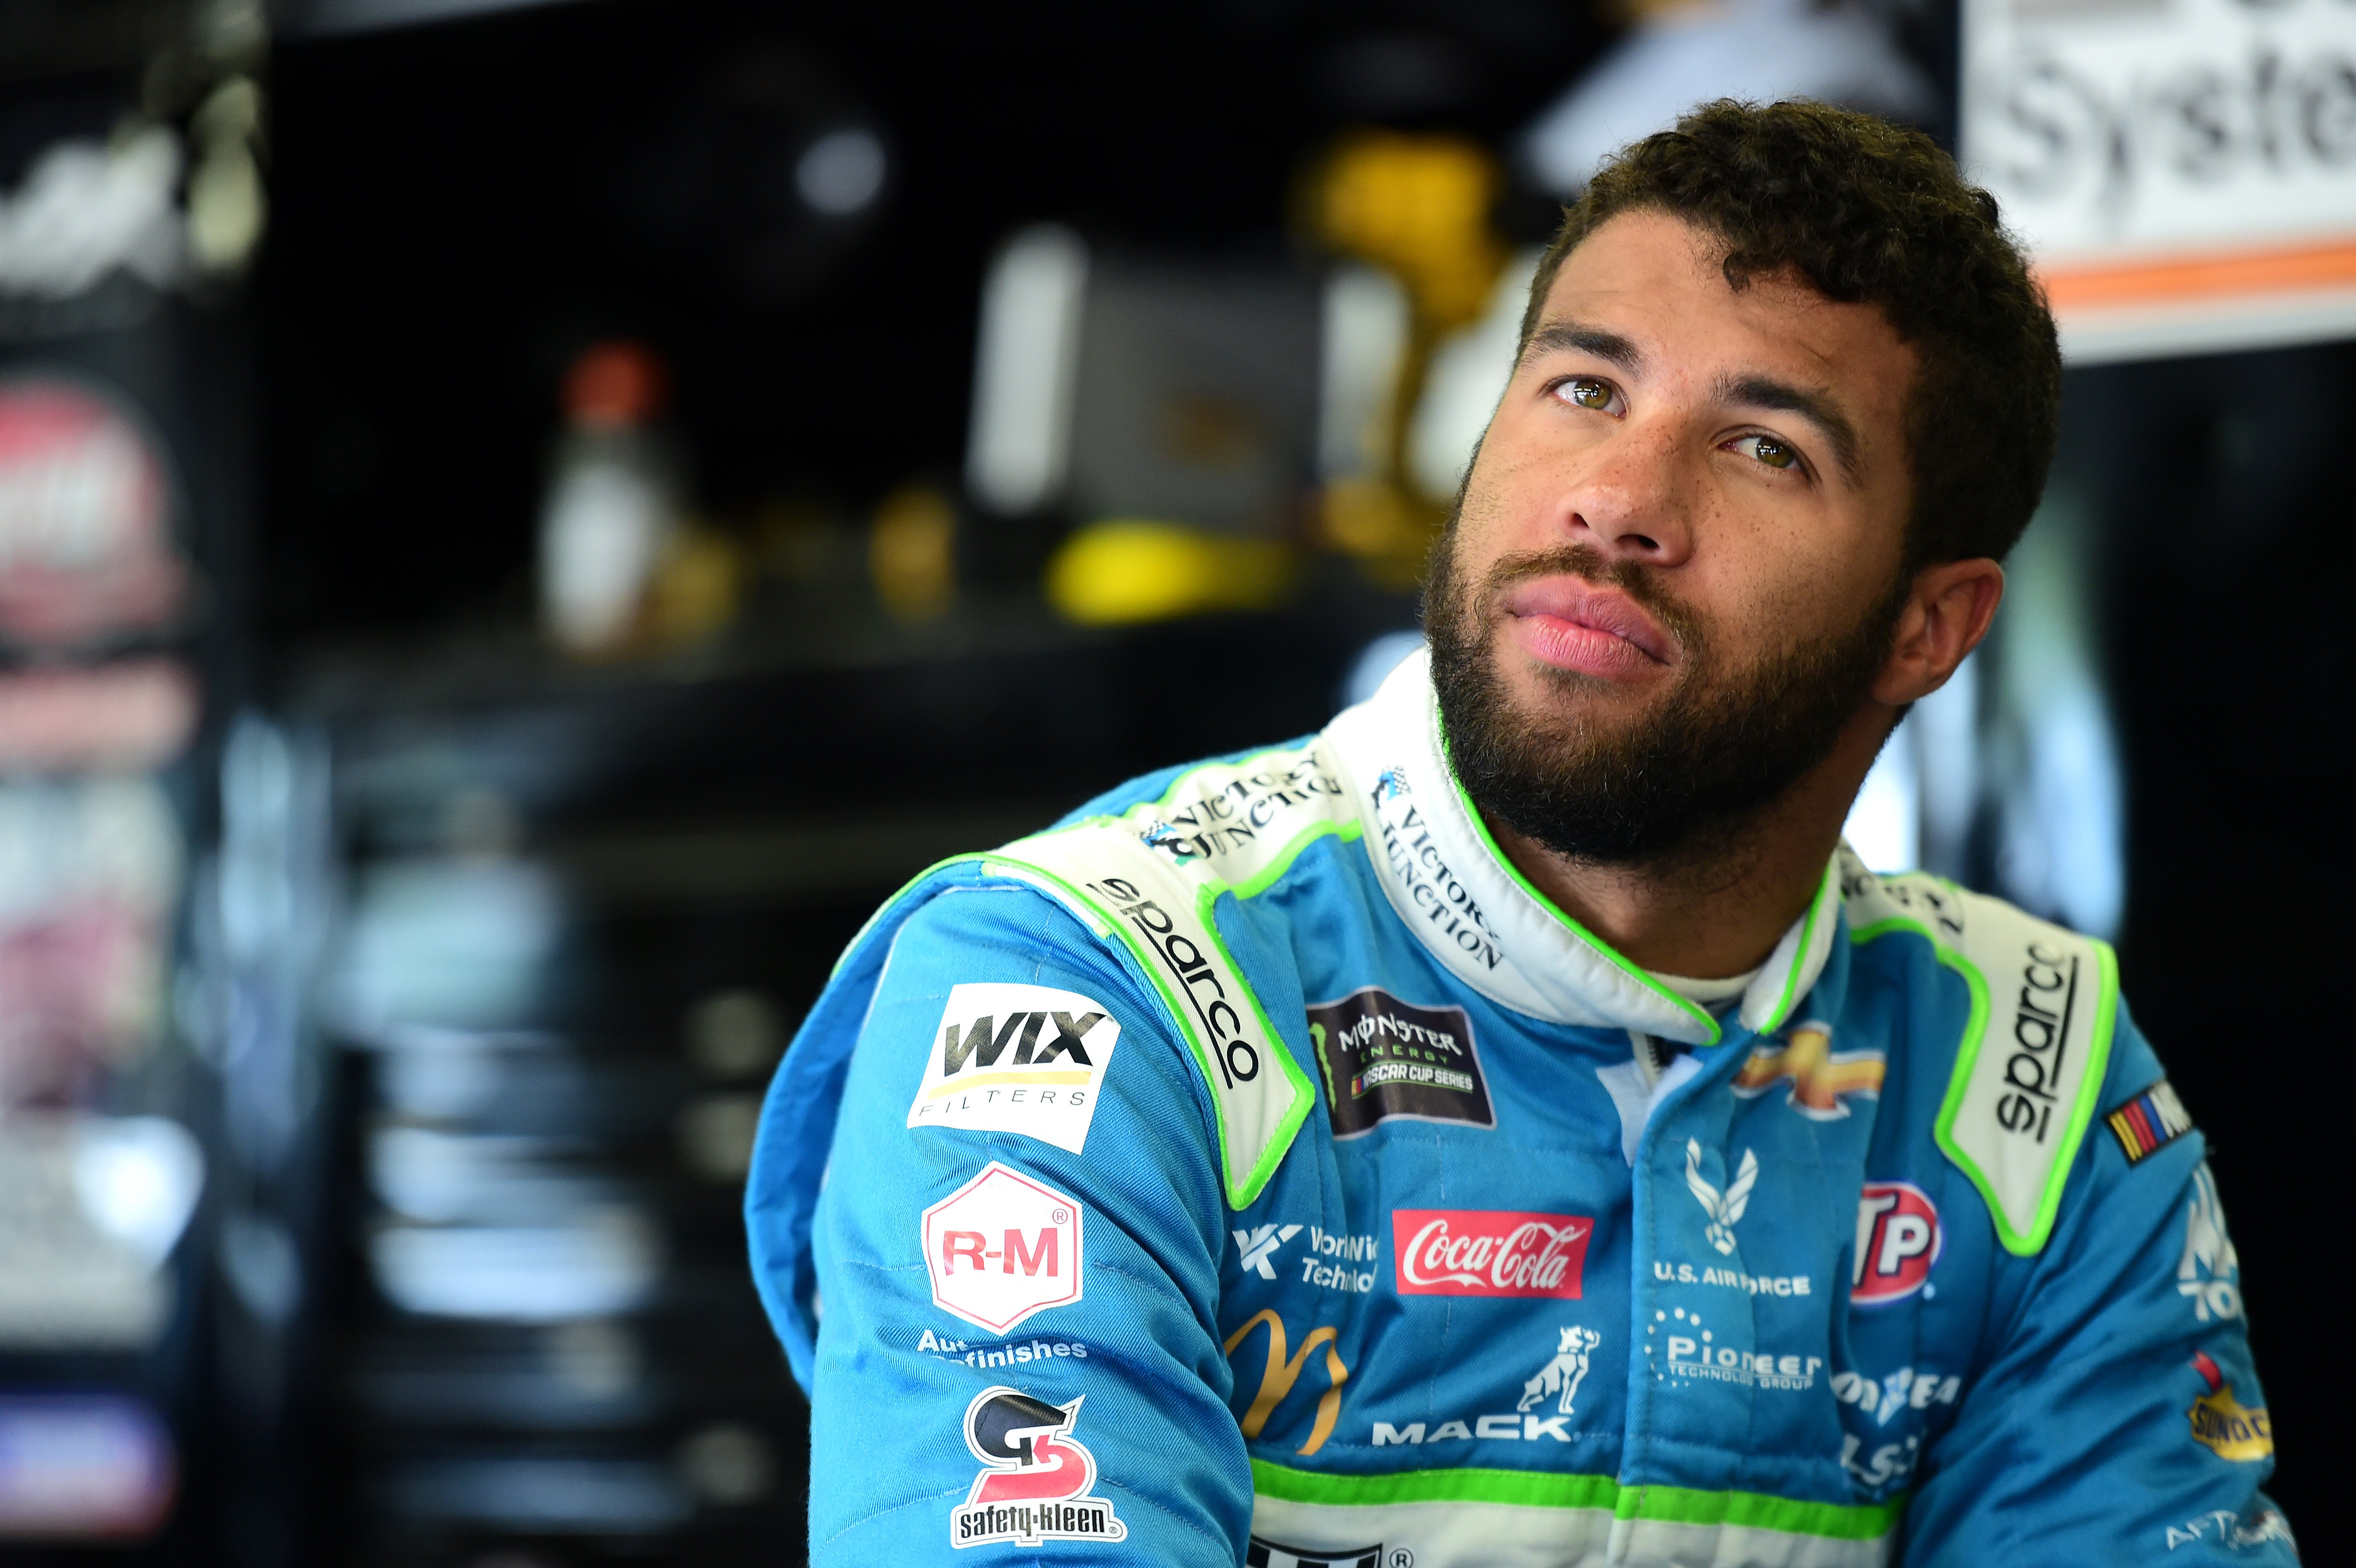 Bubba Wallace at New Hampshire Motor Speedway on July 20, 2019, in Loudon, New Hampshire. | Source: Getty Images